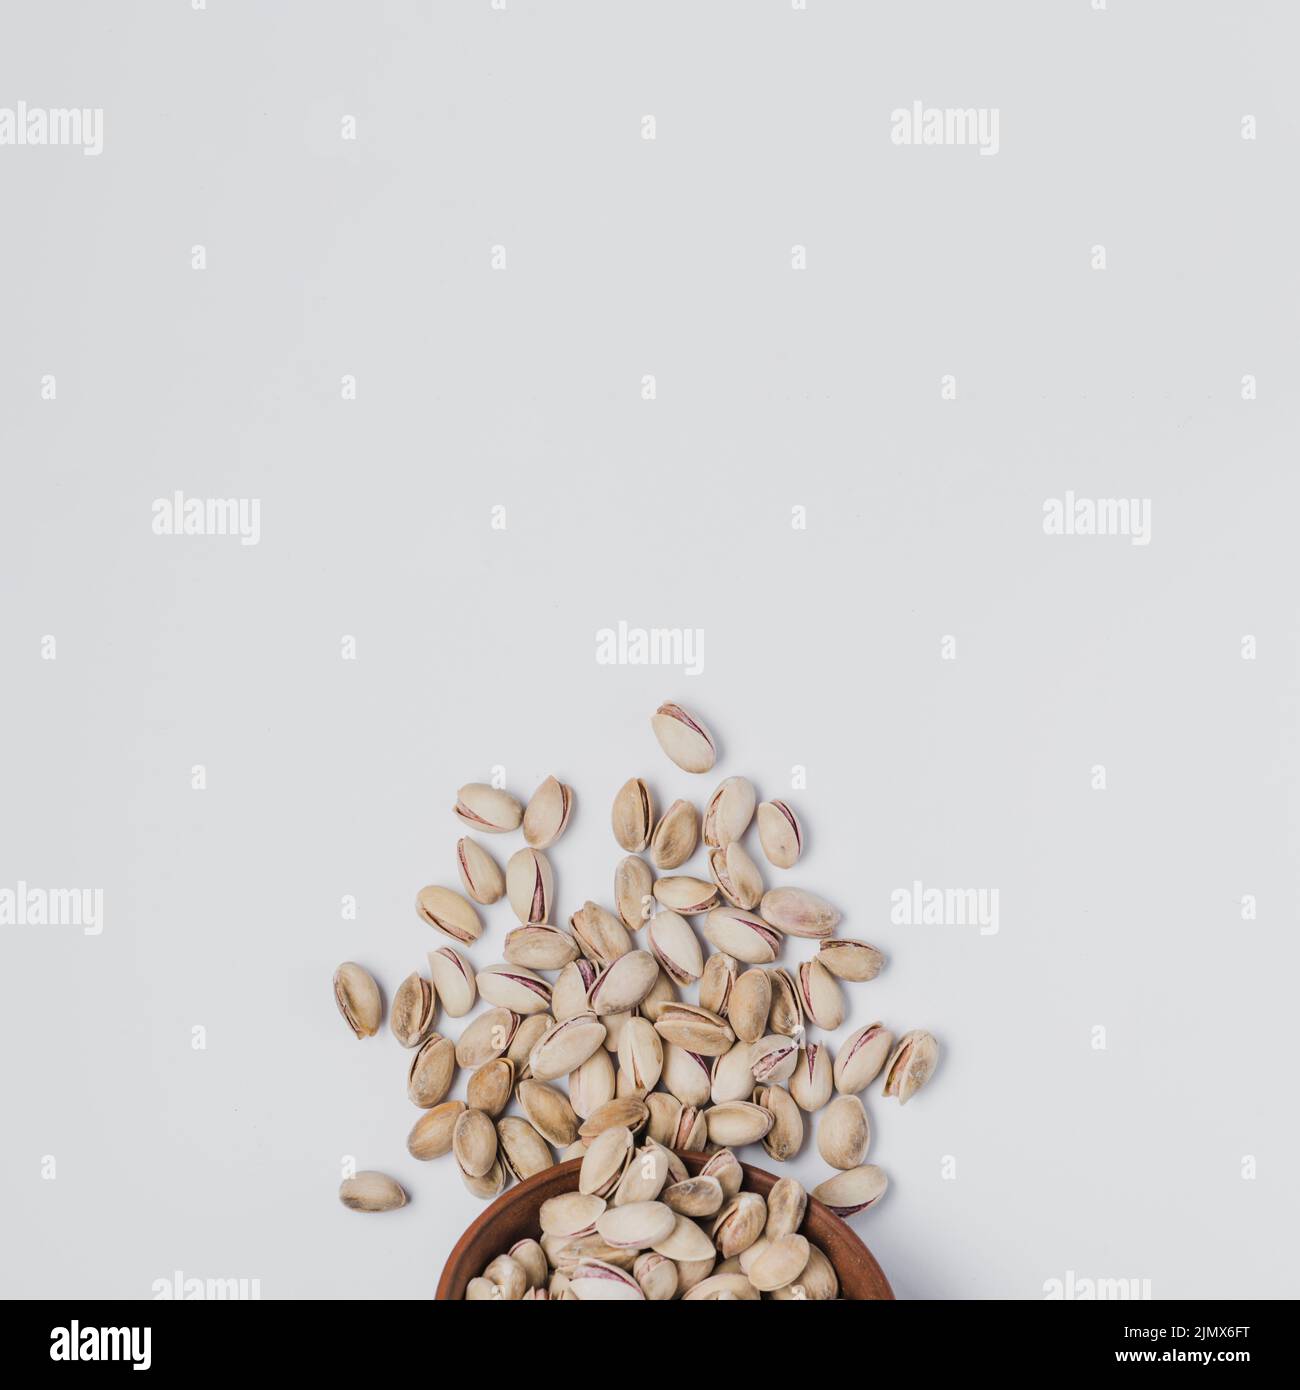 From spilled pistachios Stock Photo